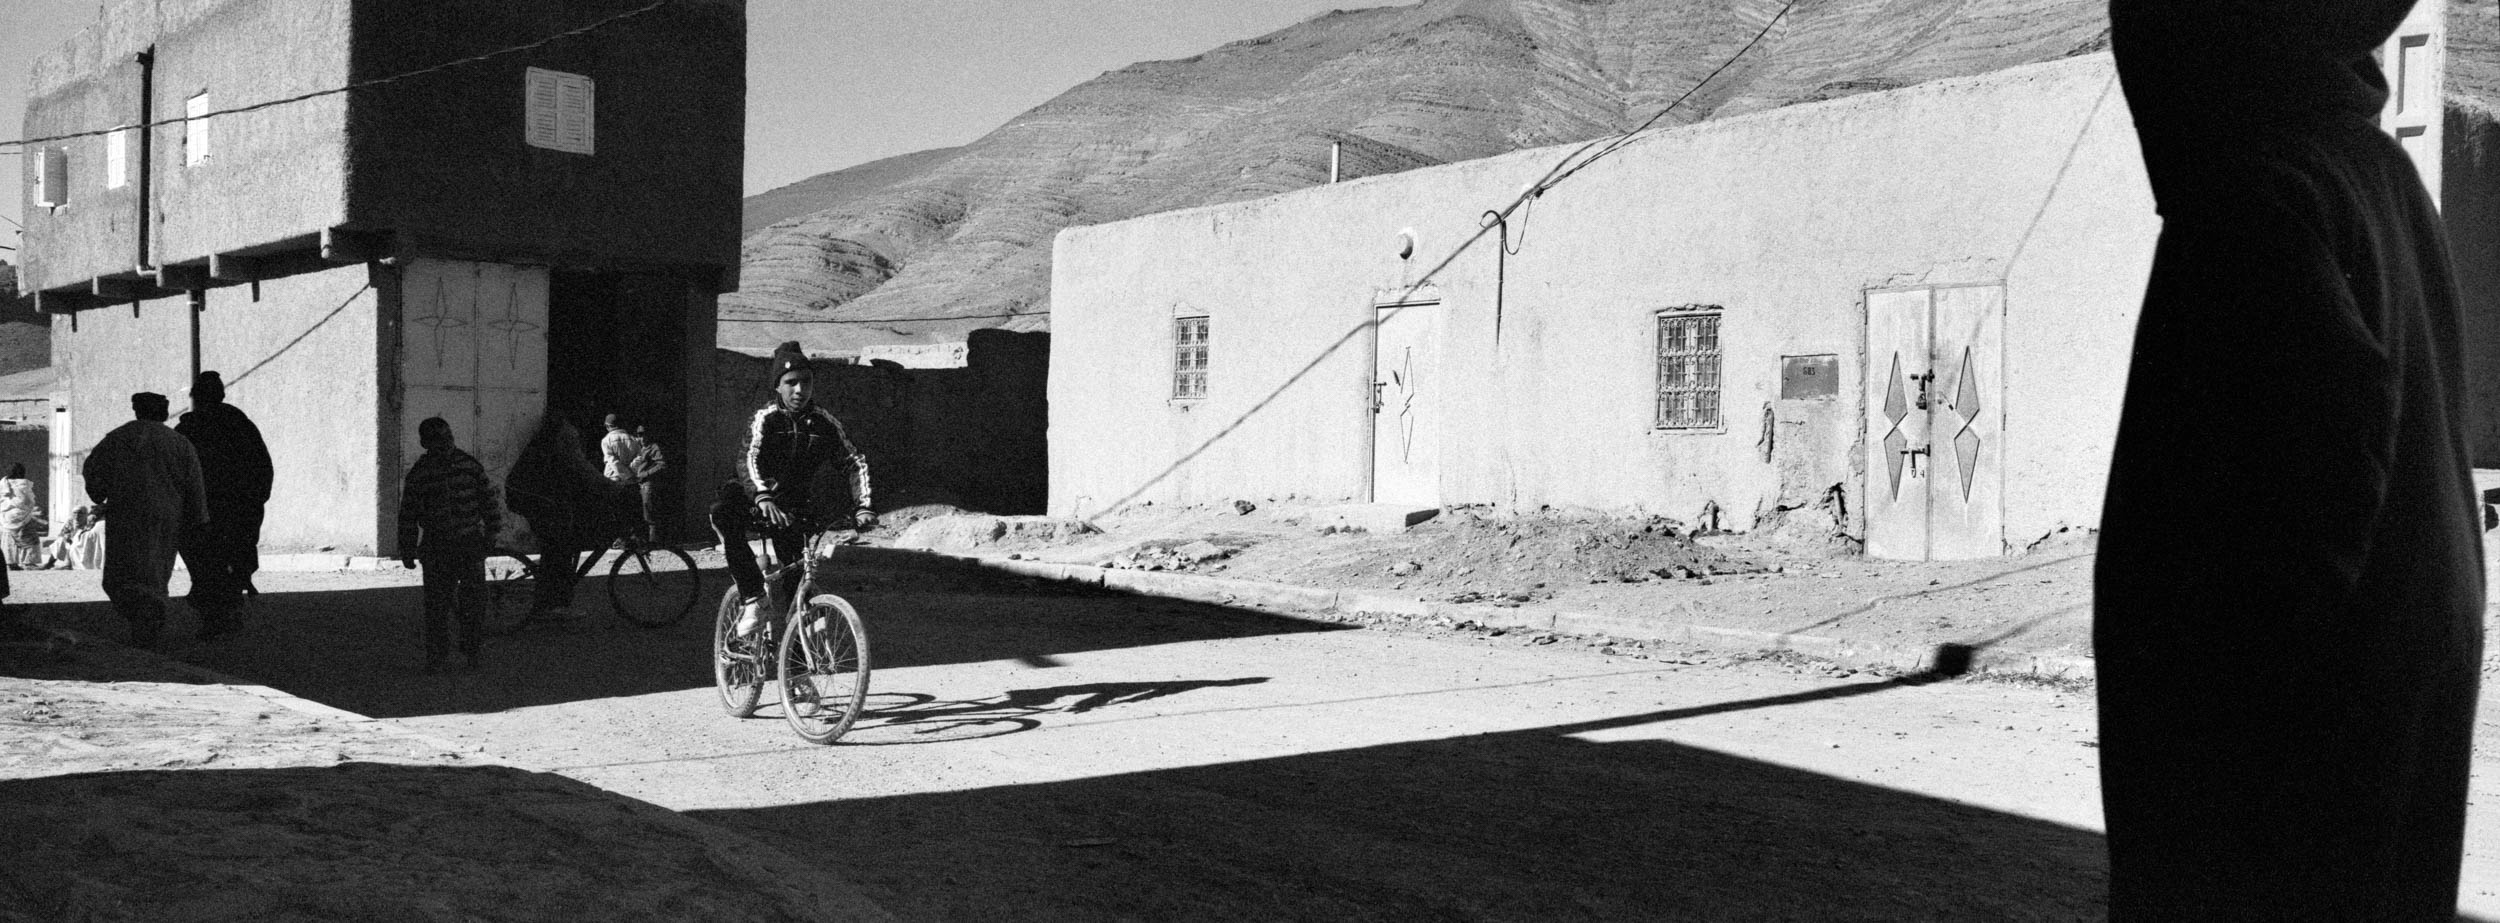 From the Atlas Mountains to the desert - Martin Gros